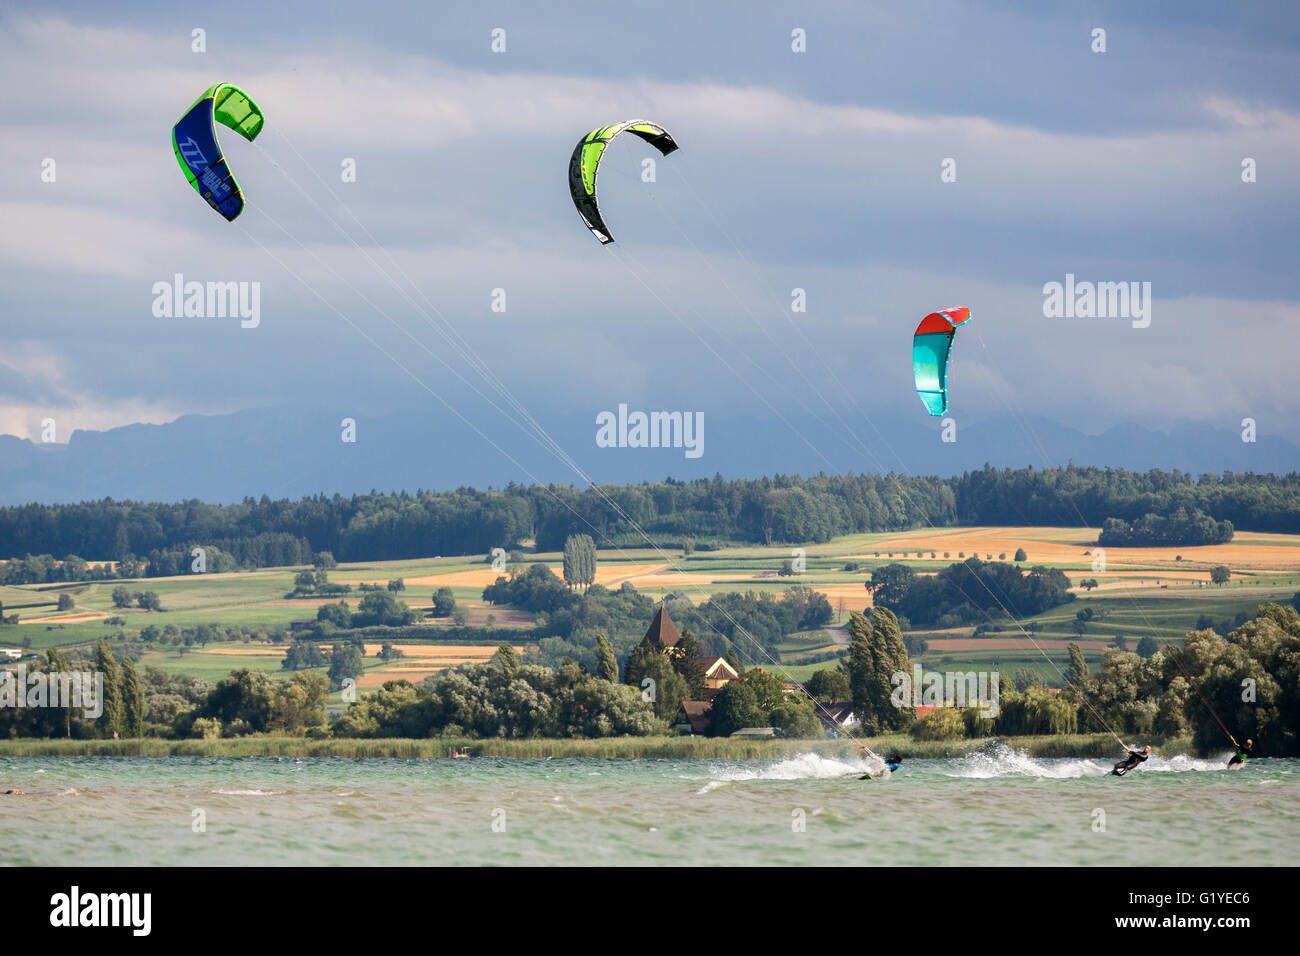 Kiters during a storm on Lake Constance between the island Reichenau and Allensbach, Lake Constance, Germany Stock Photo